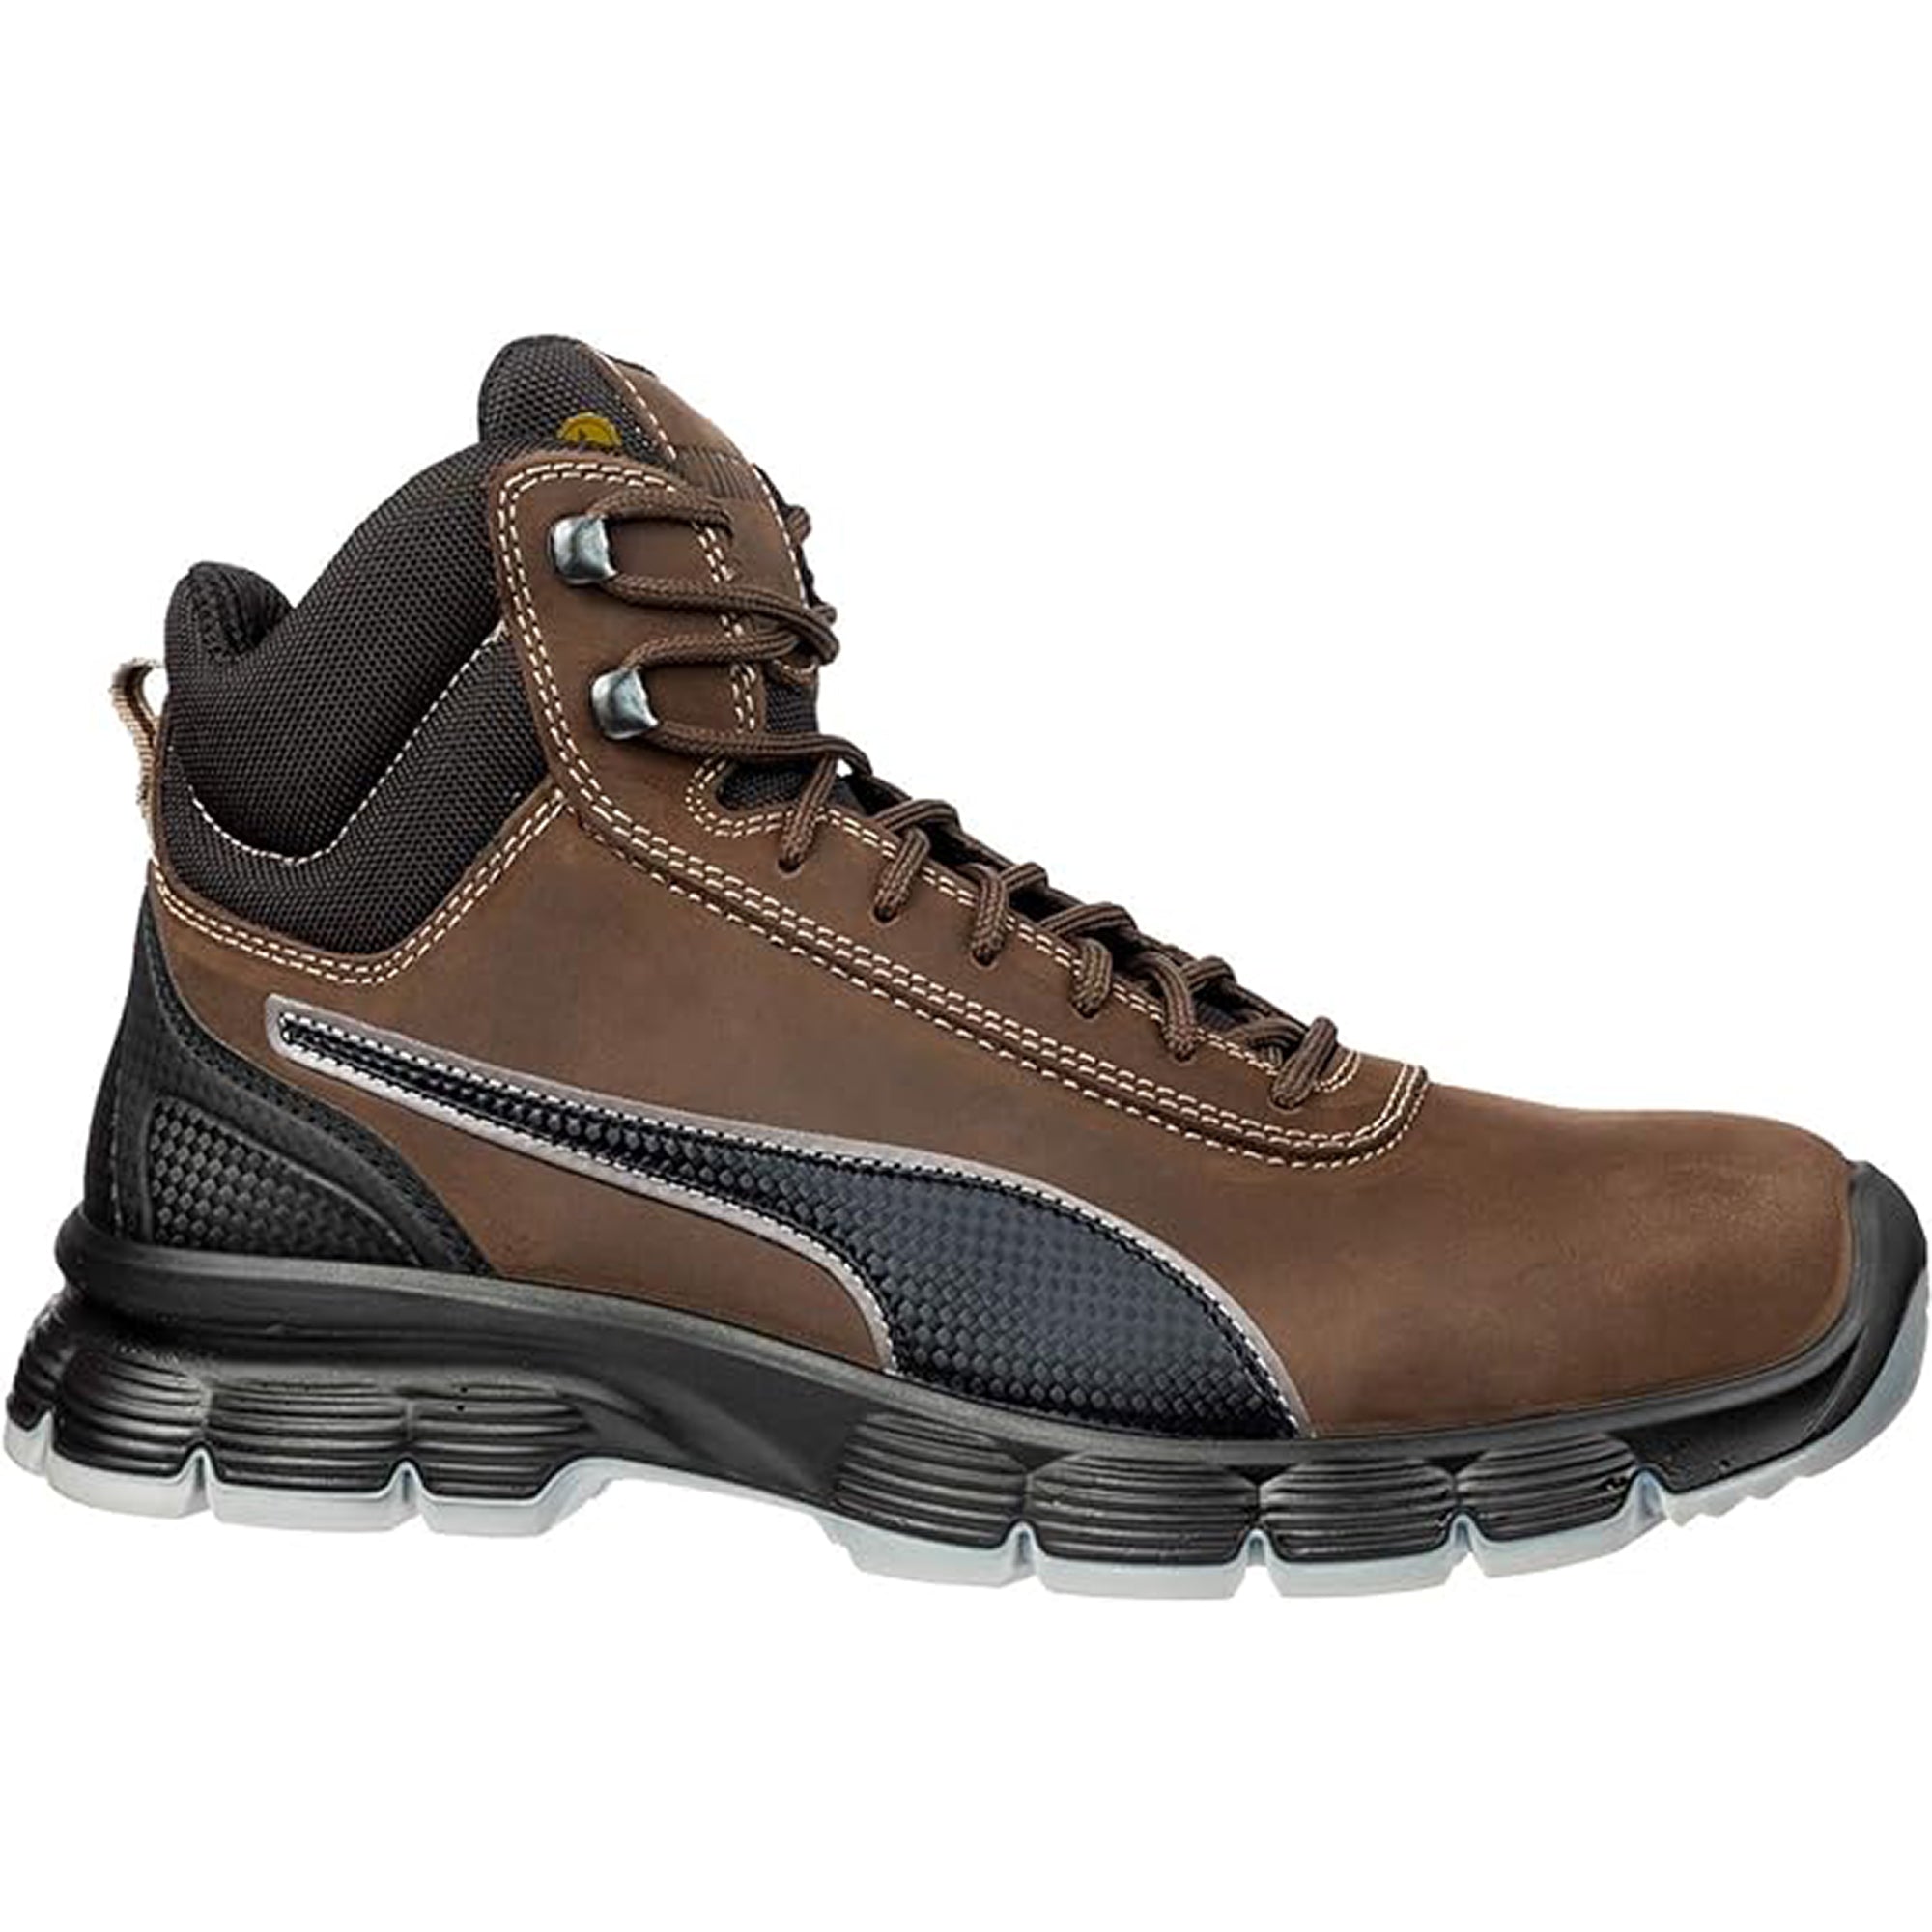 Puma SAFETY CONDOR Mid S3 ESD SRC Work Boots Shoes Leather Steel Toe Brown